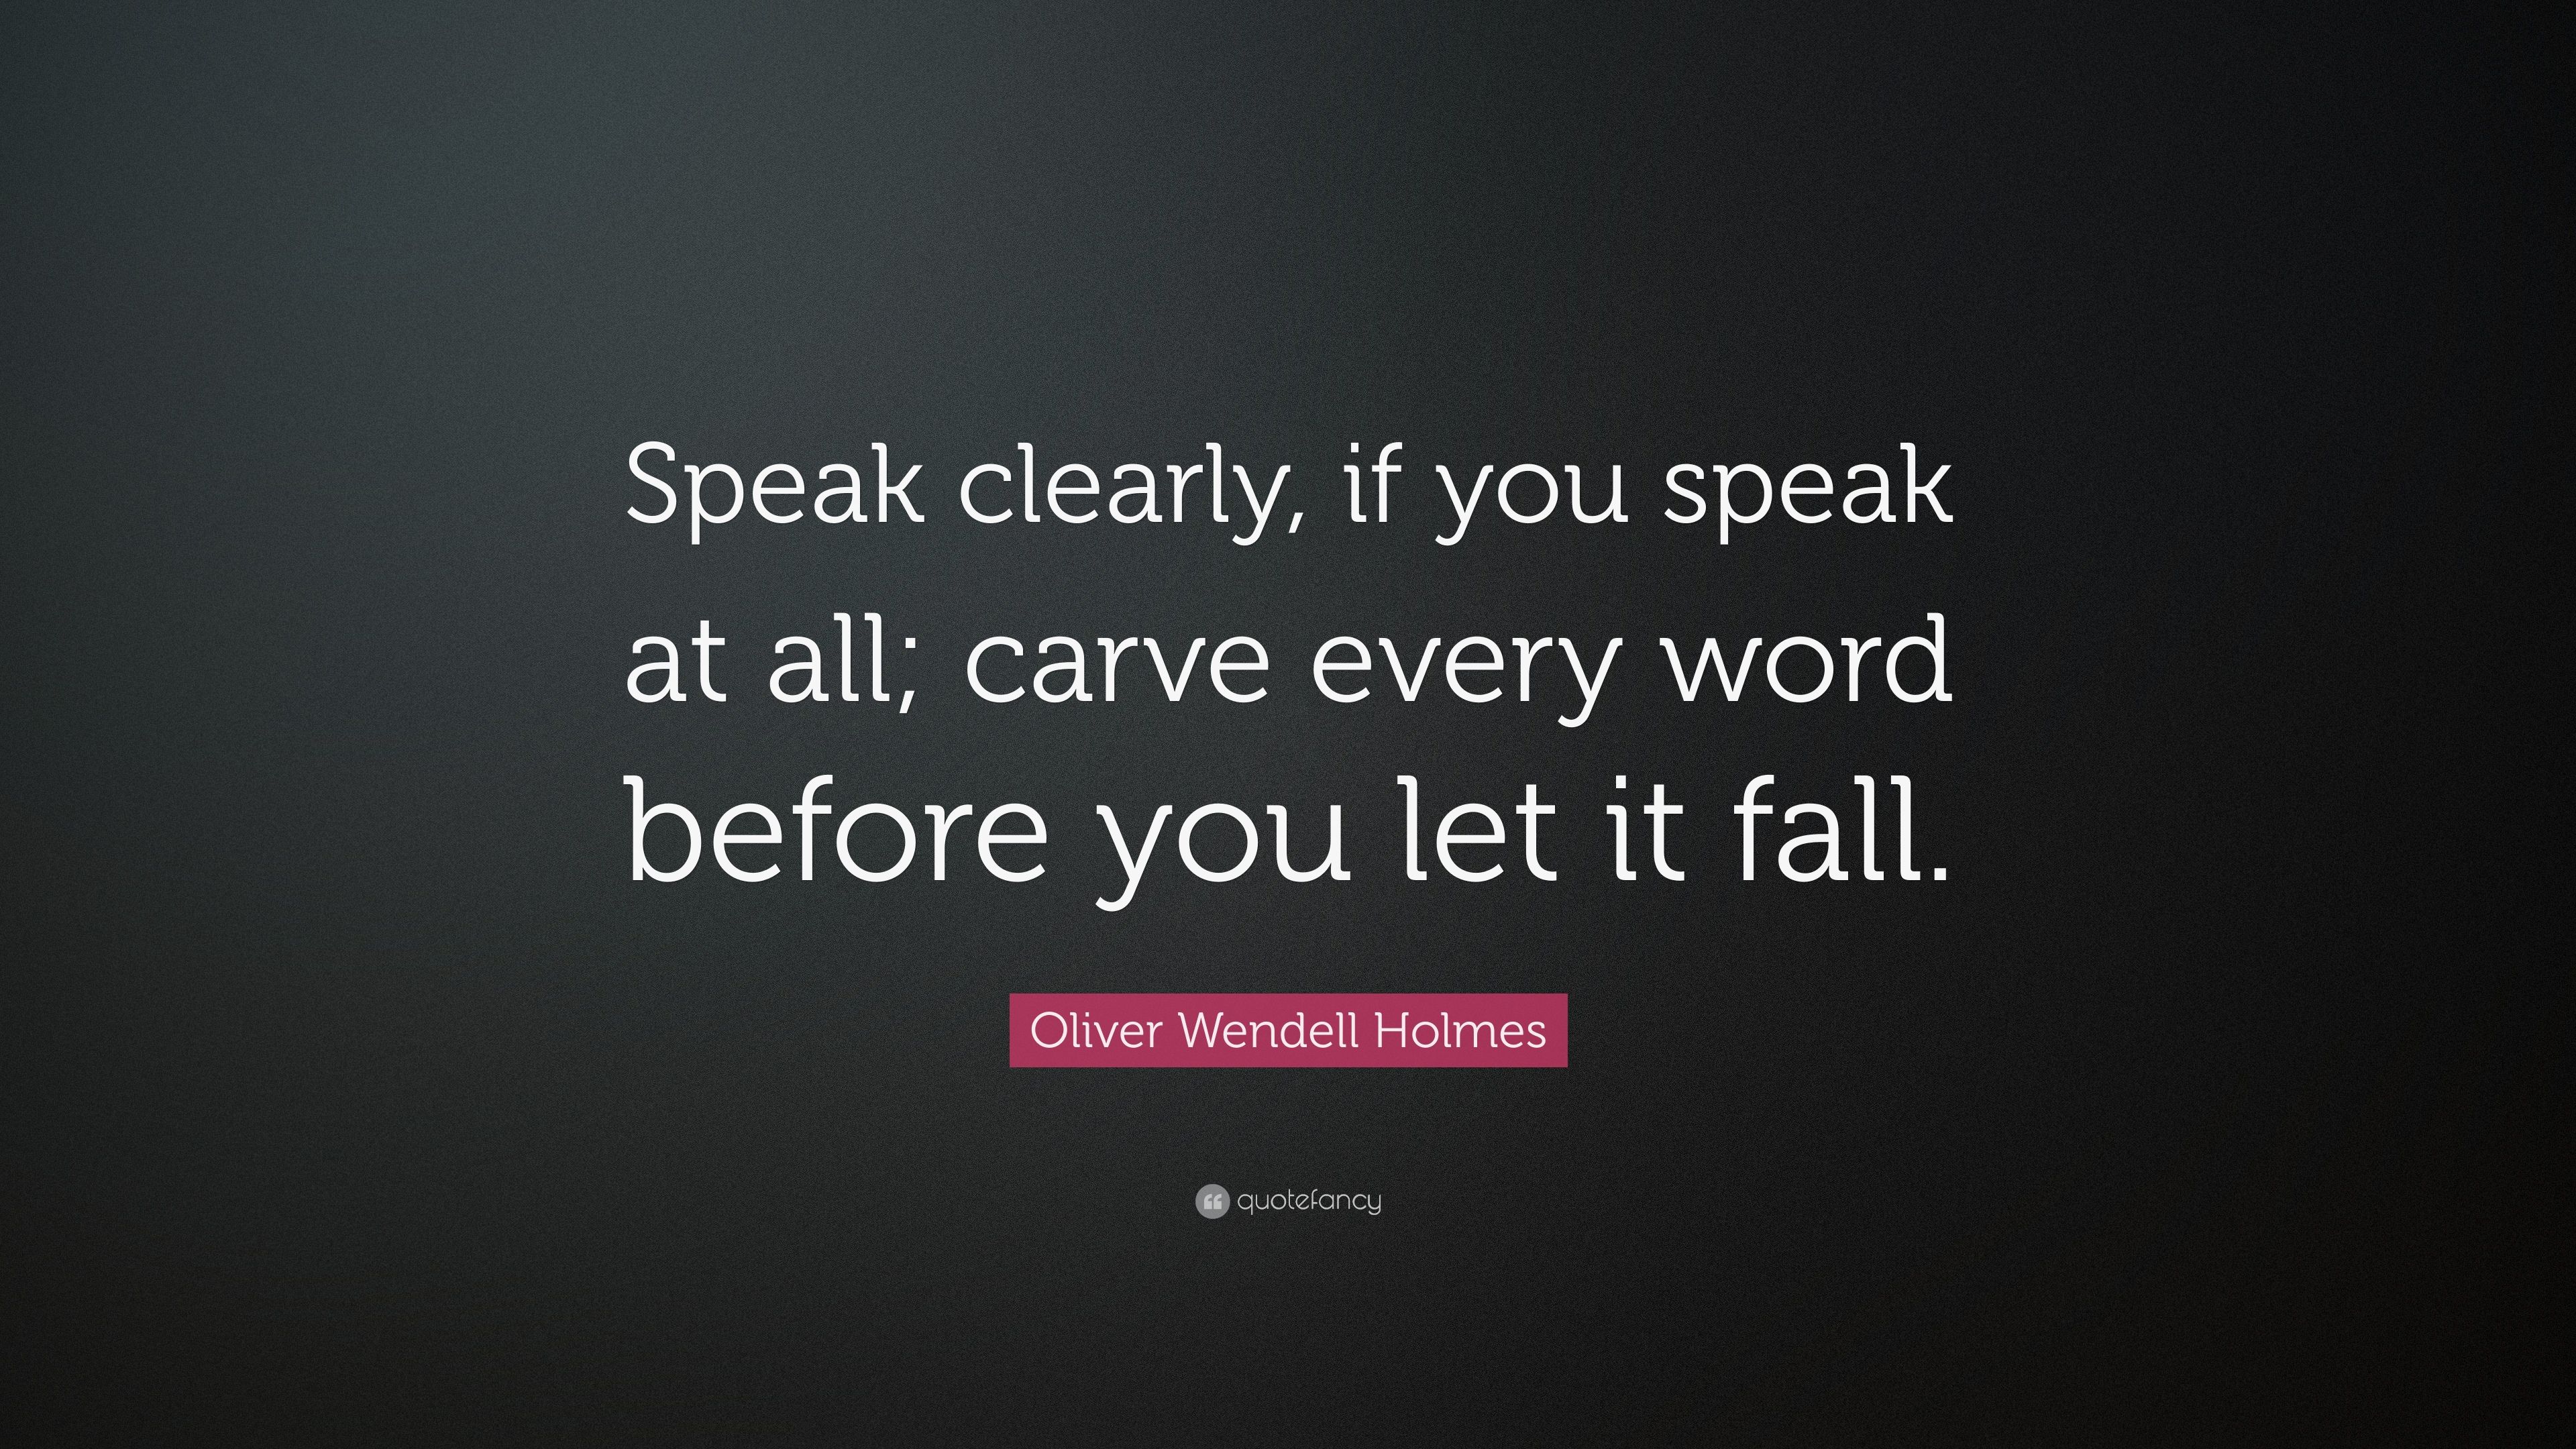 Oliver Wendell Holmes Quote: “Speak clearly, if you speak at all